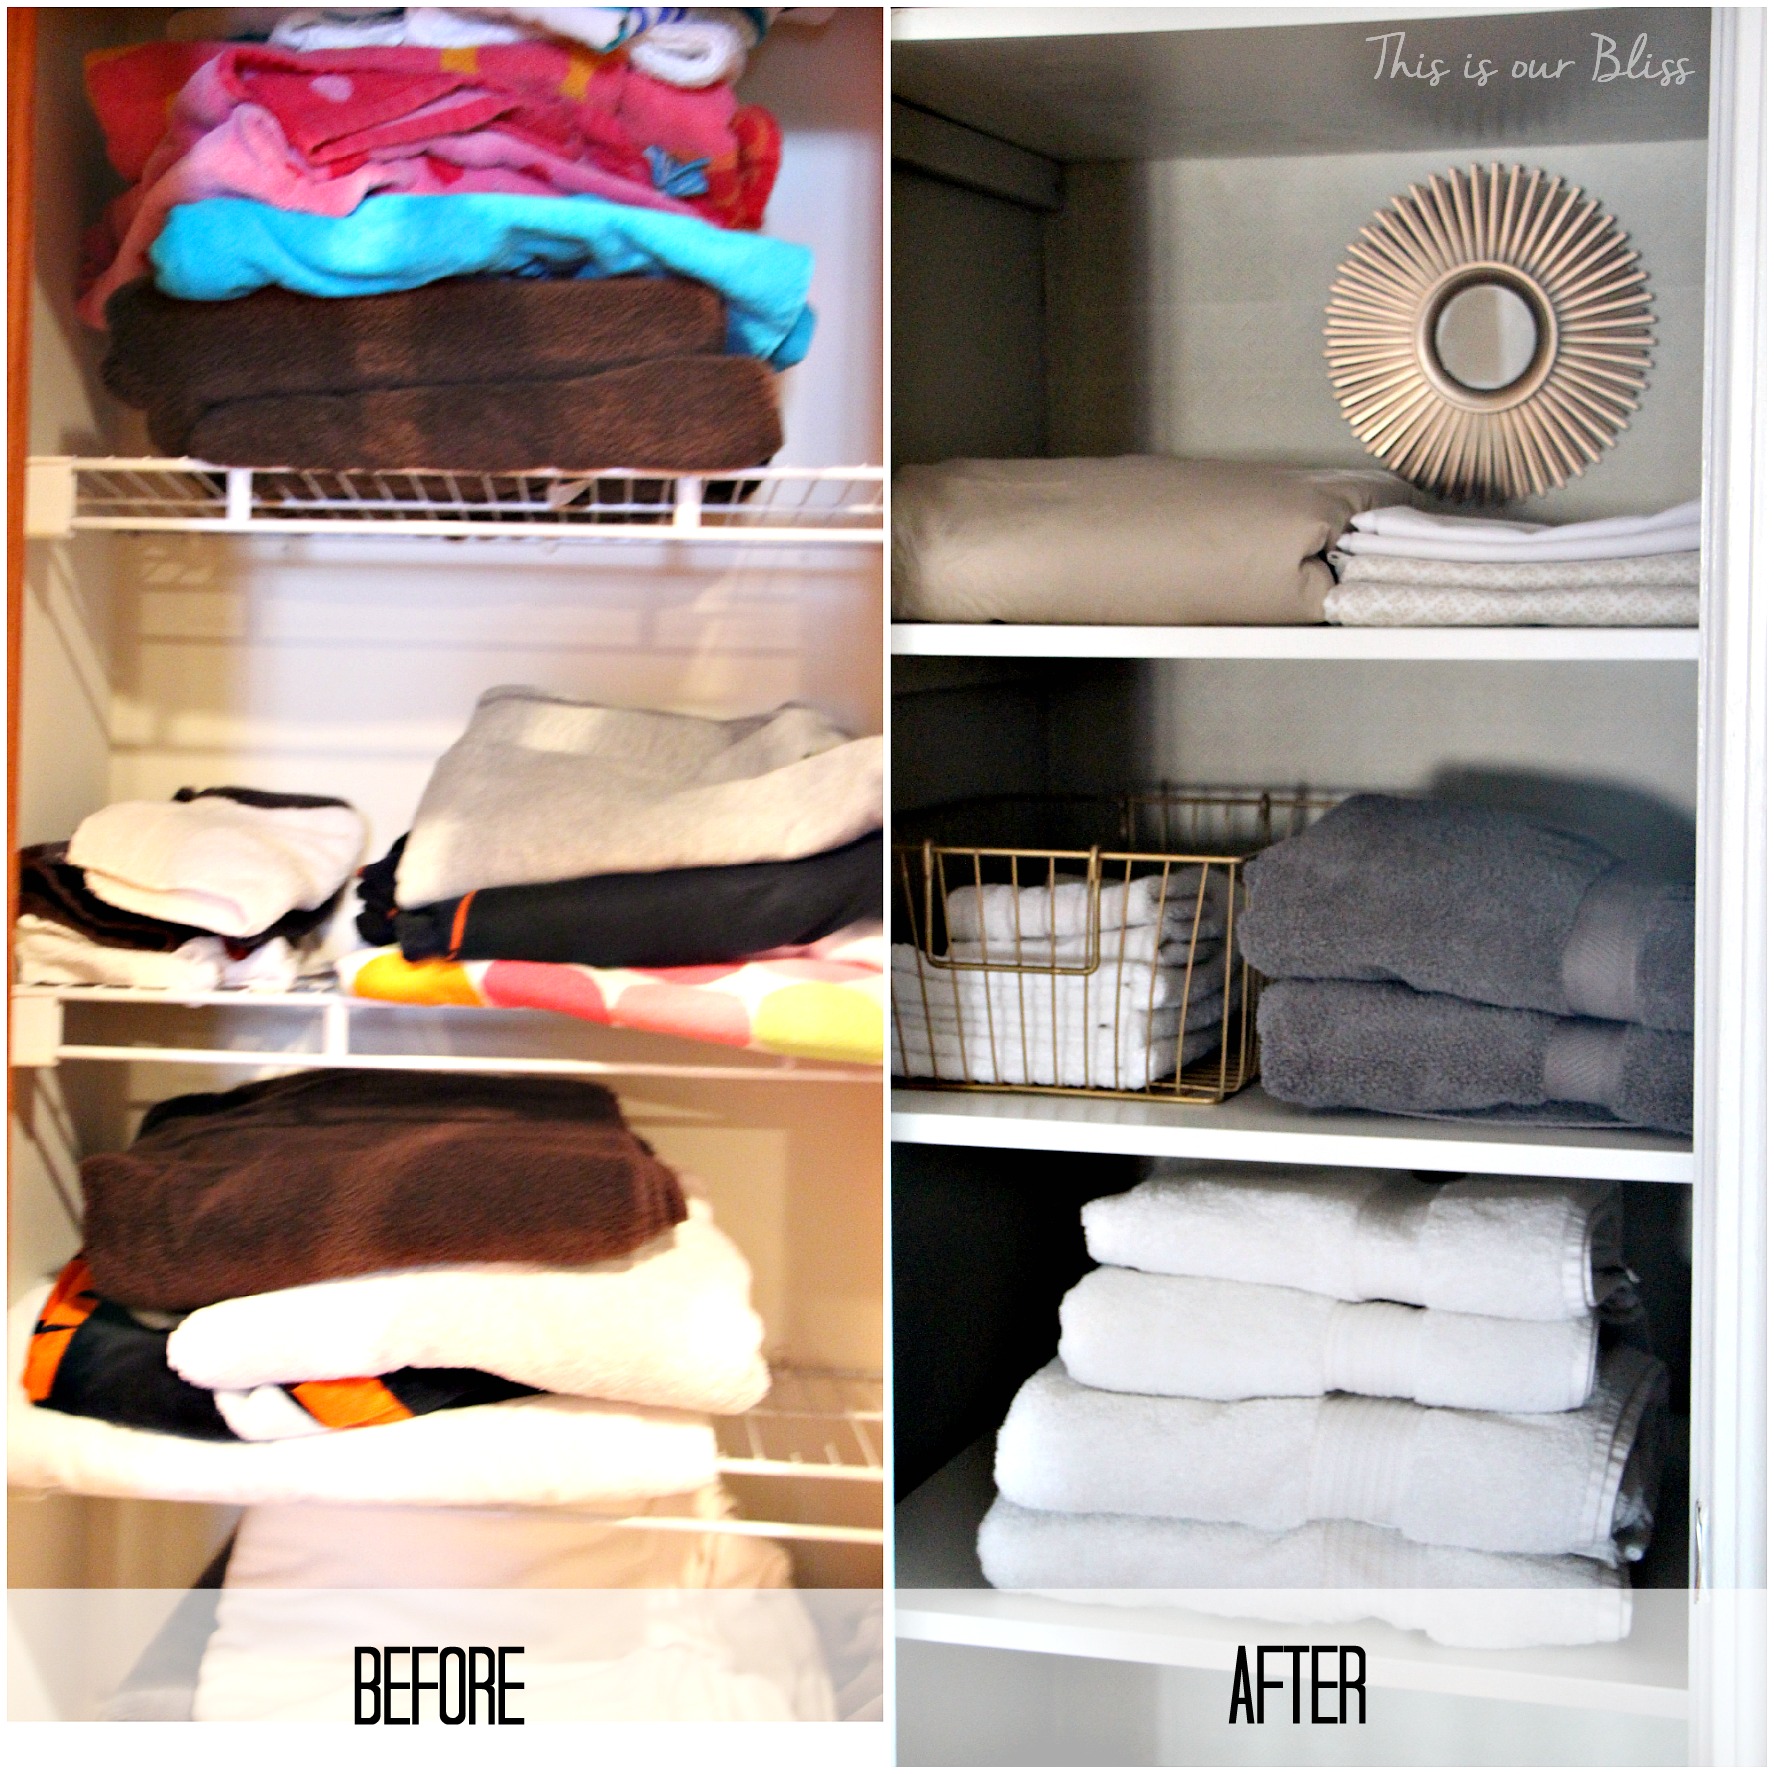 Linen closet before and after - Decluttered & organized linen closet - This is our Bliss